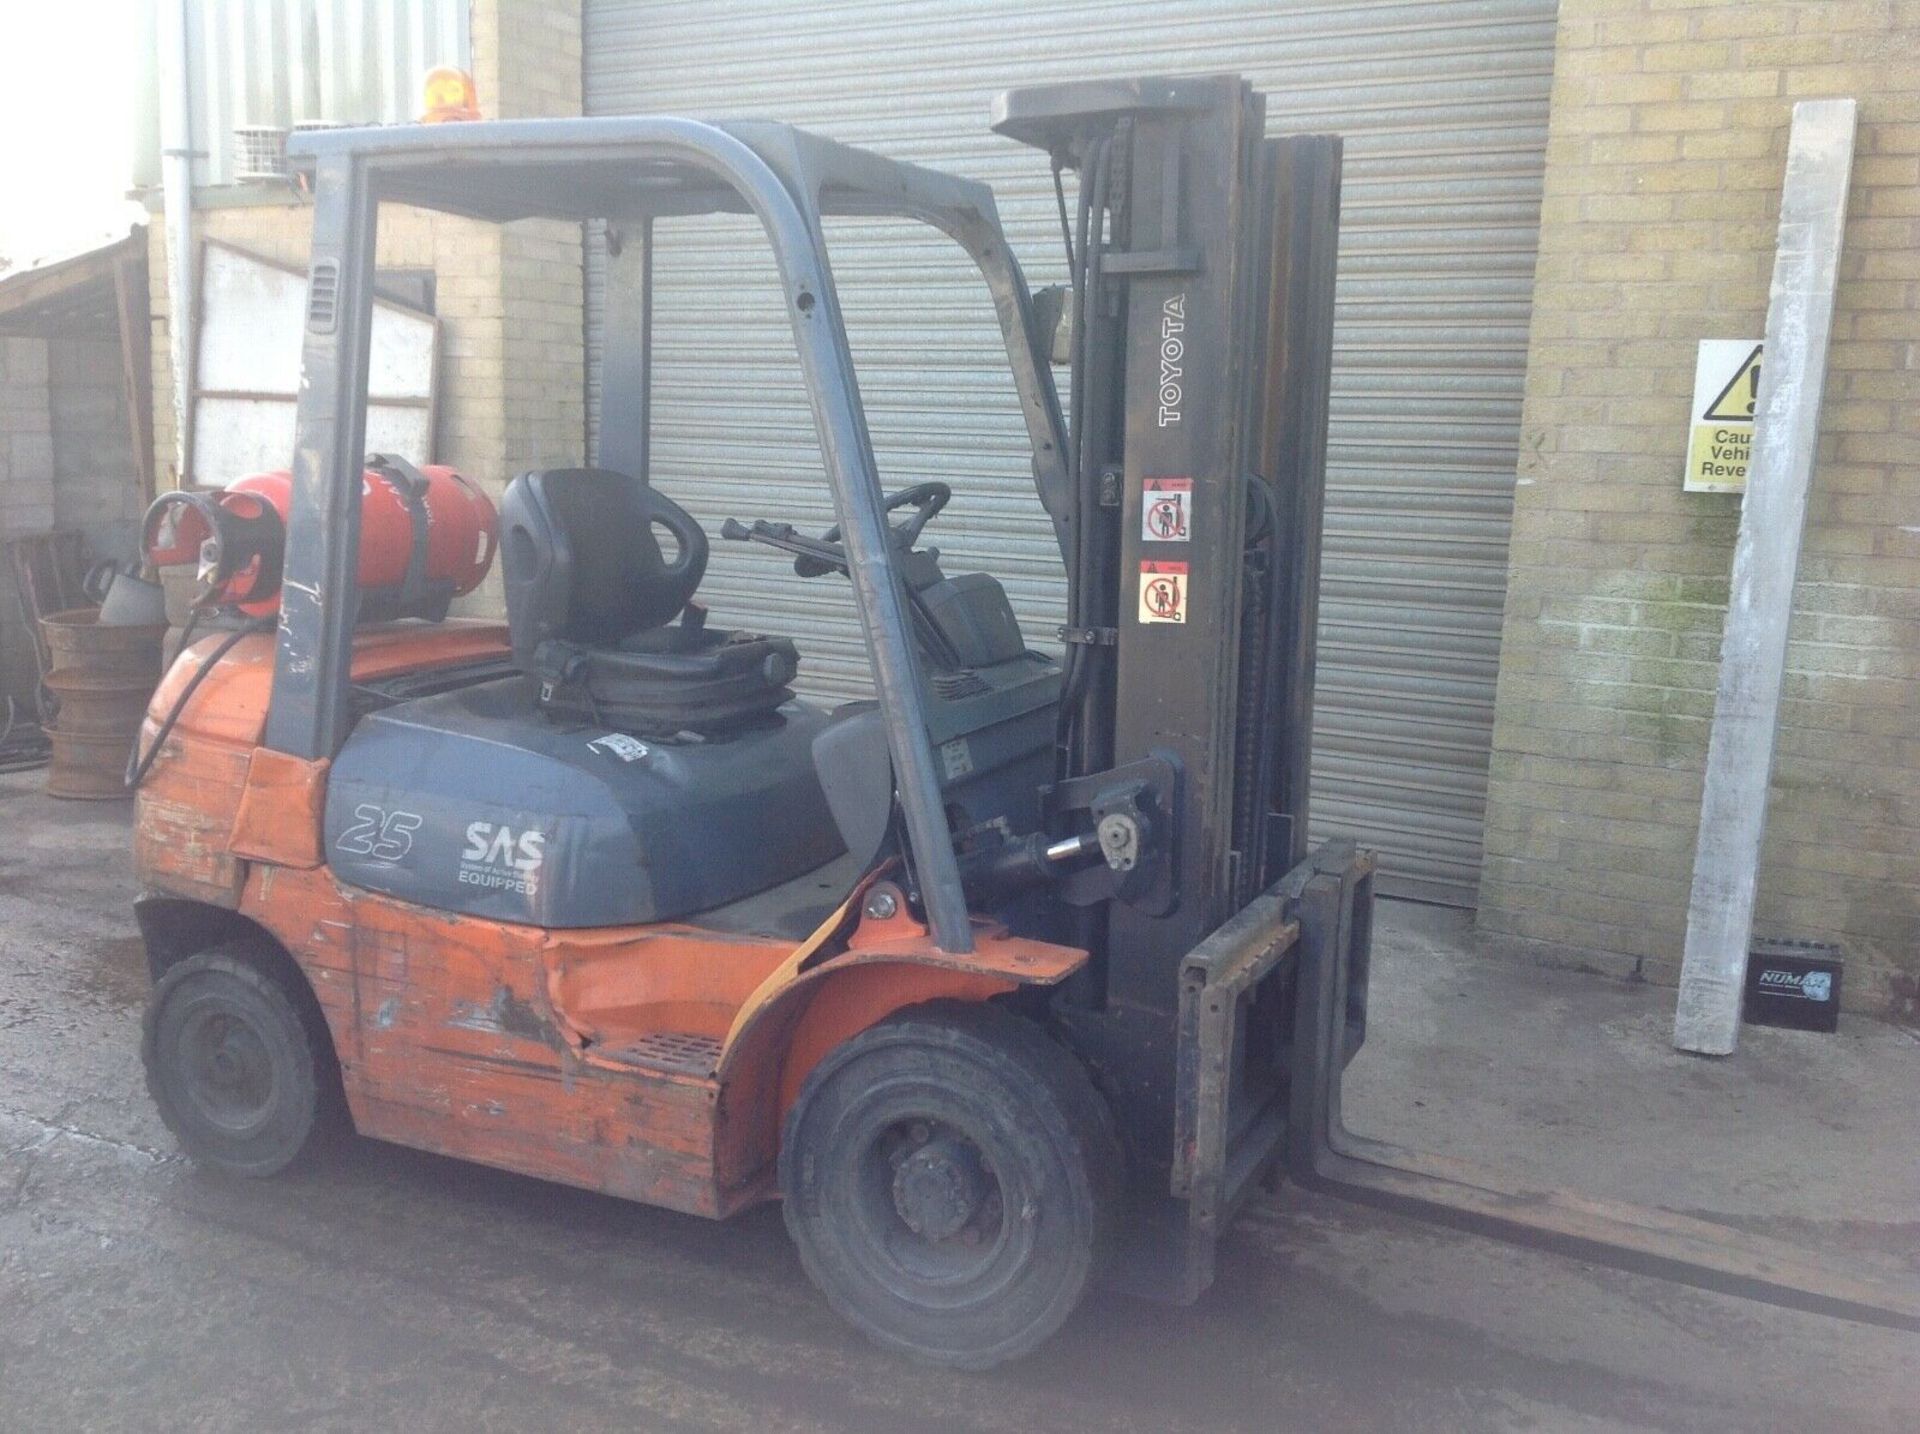 Toyota 2.5 ton forklift truck converted to petrol